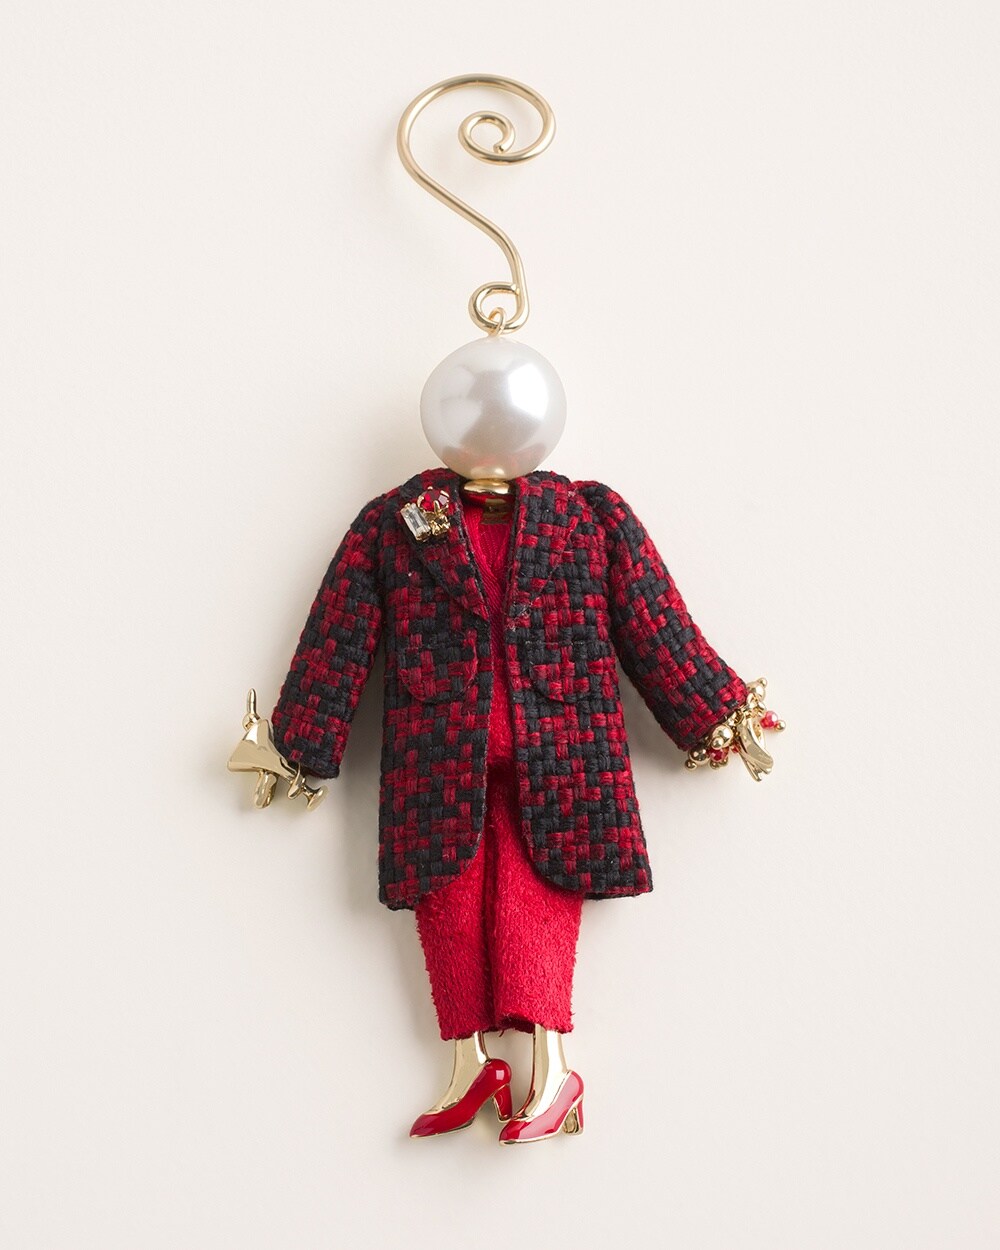 Holly Red Lady Doll Ornament